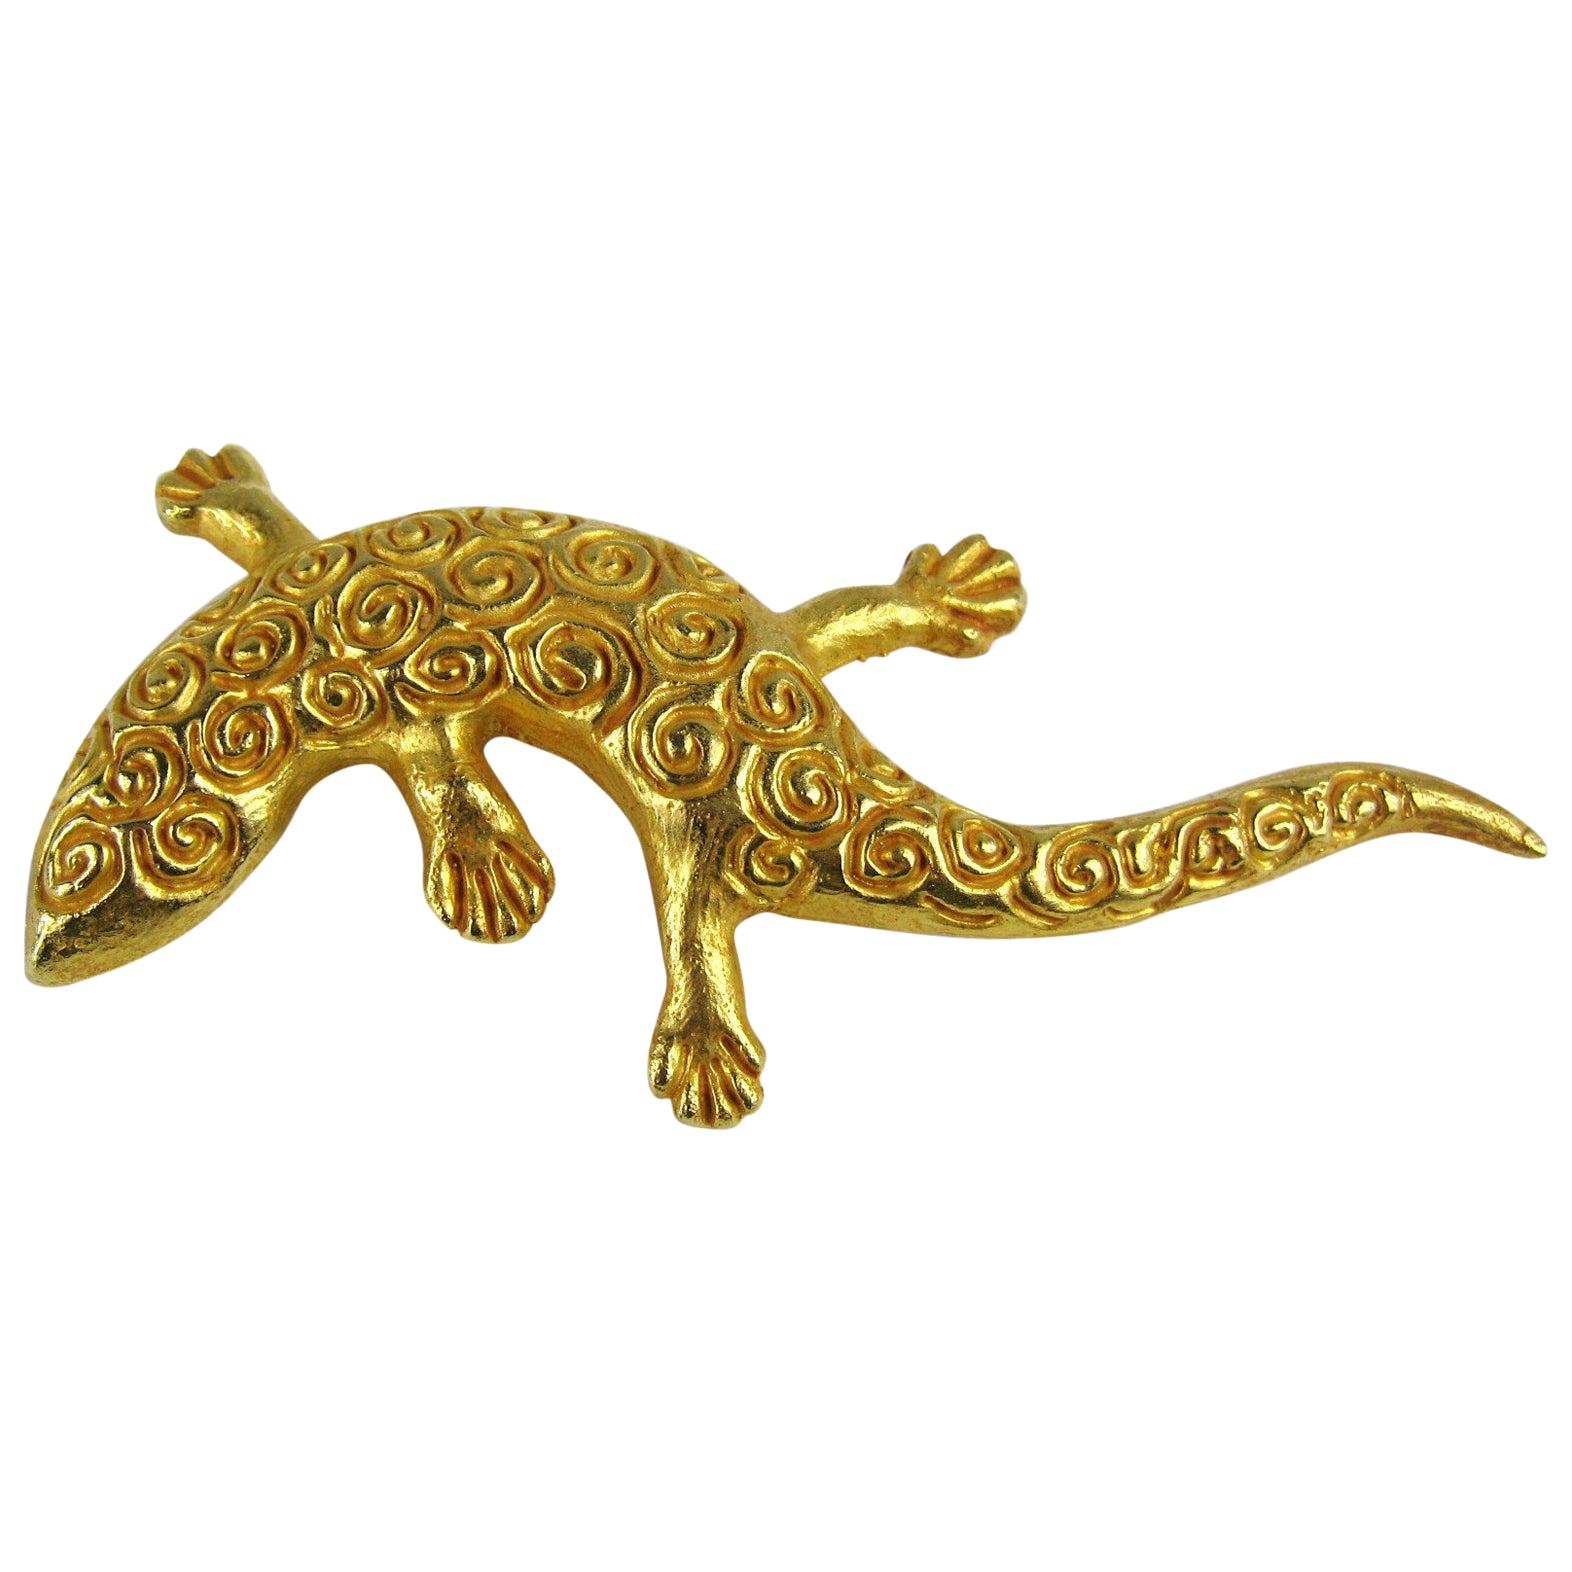  Dominique Aurientis Made France Lizard Gilt Gold Pin Brooch, Never worn 1980s